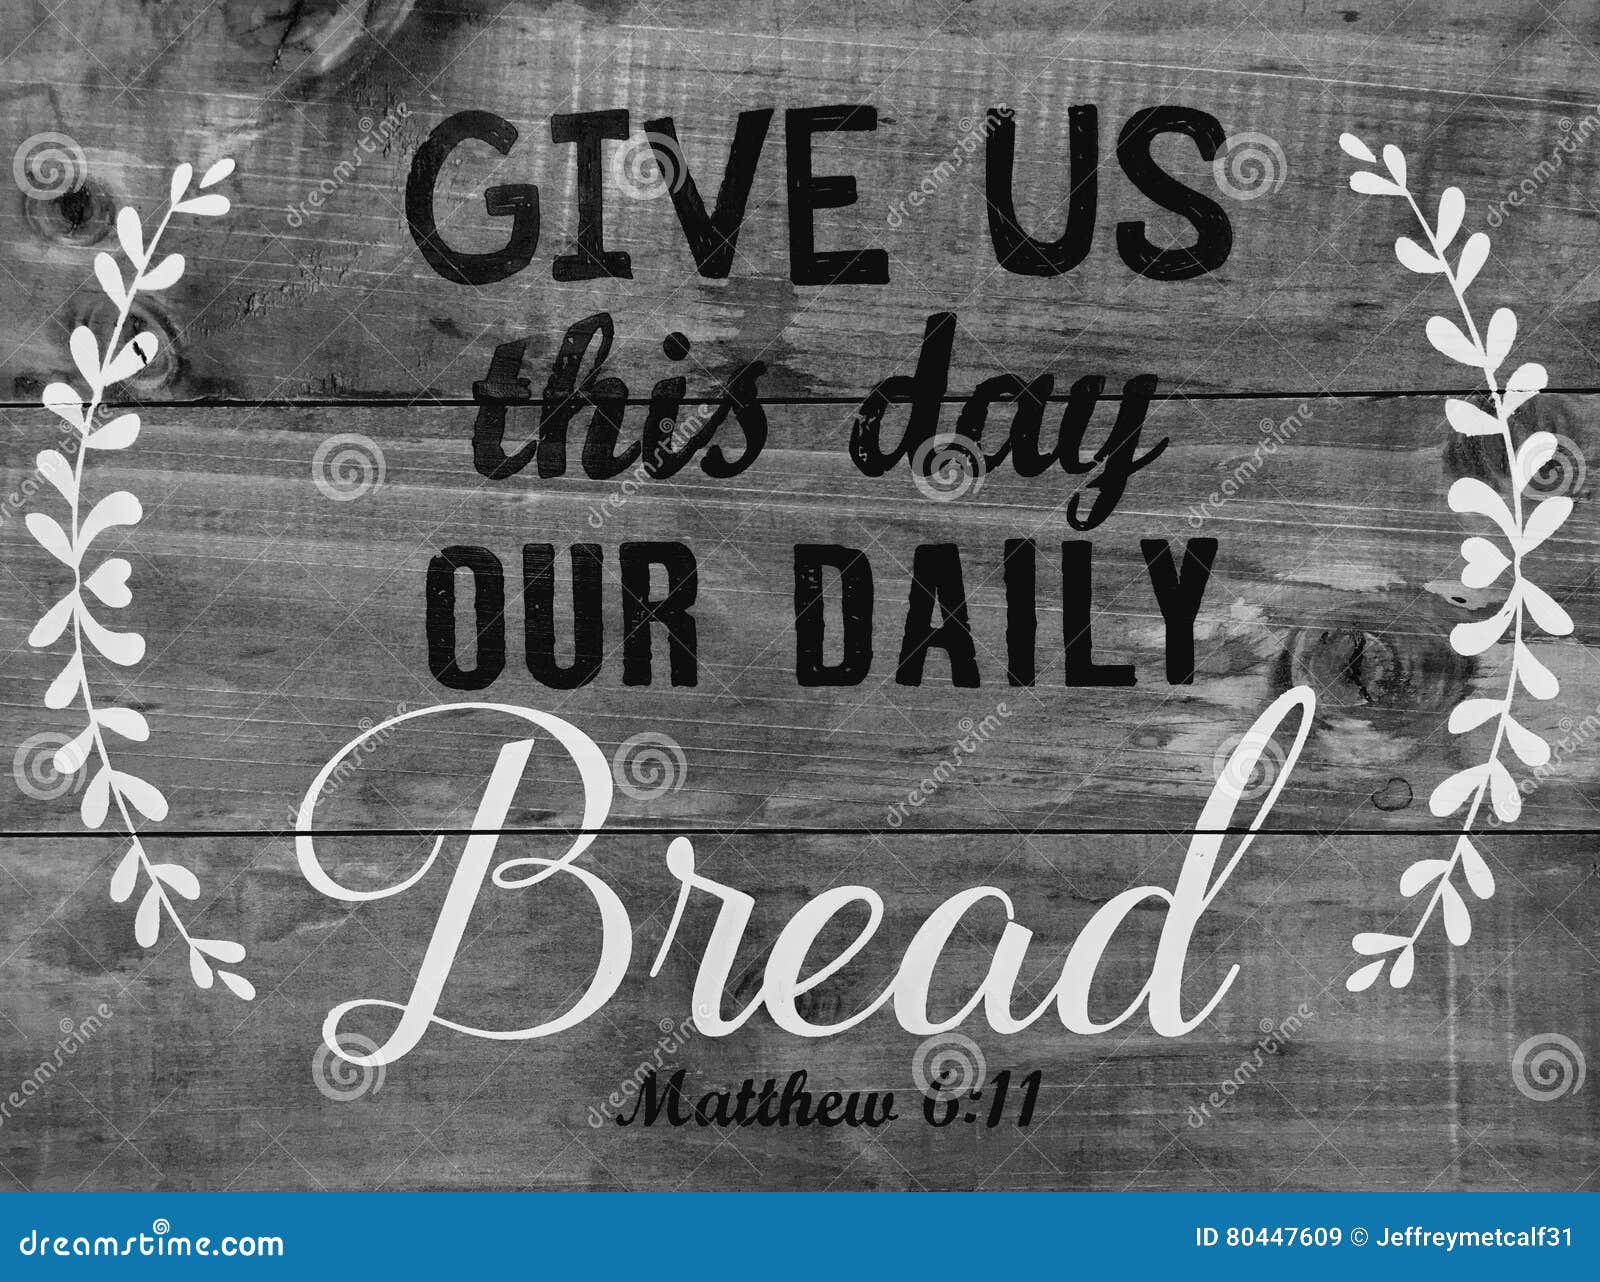 Our Daily Bread Bible Verse Of The Day Bread Poster